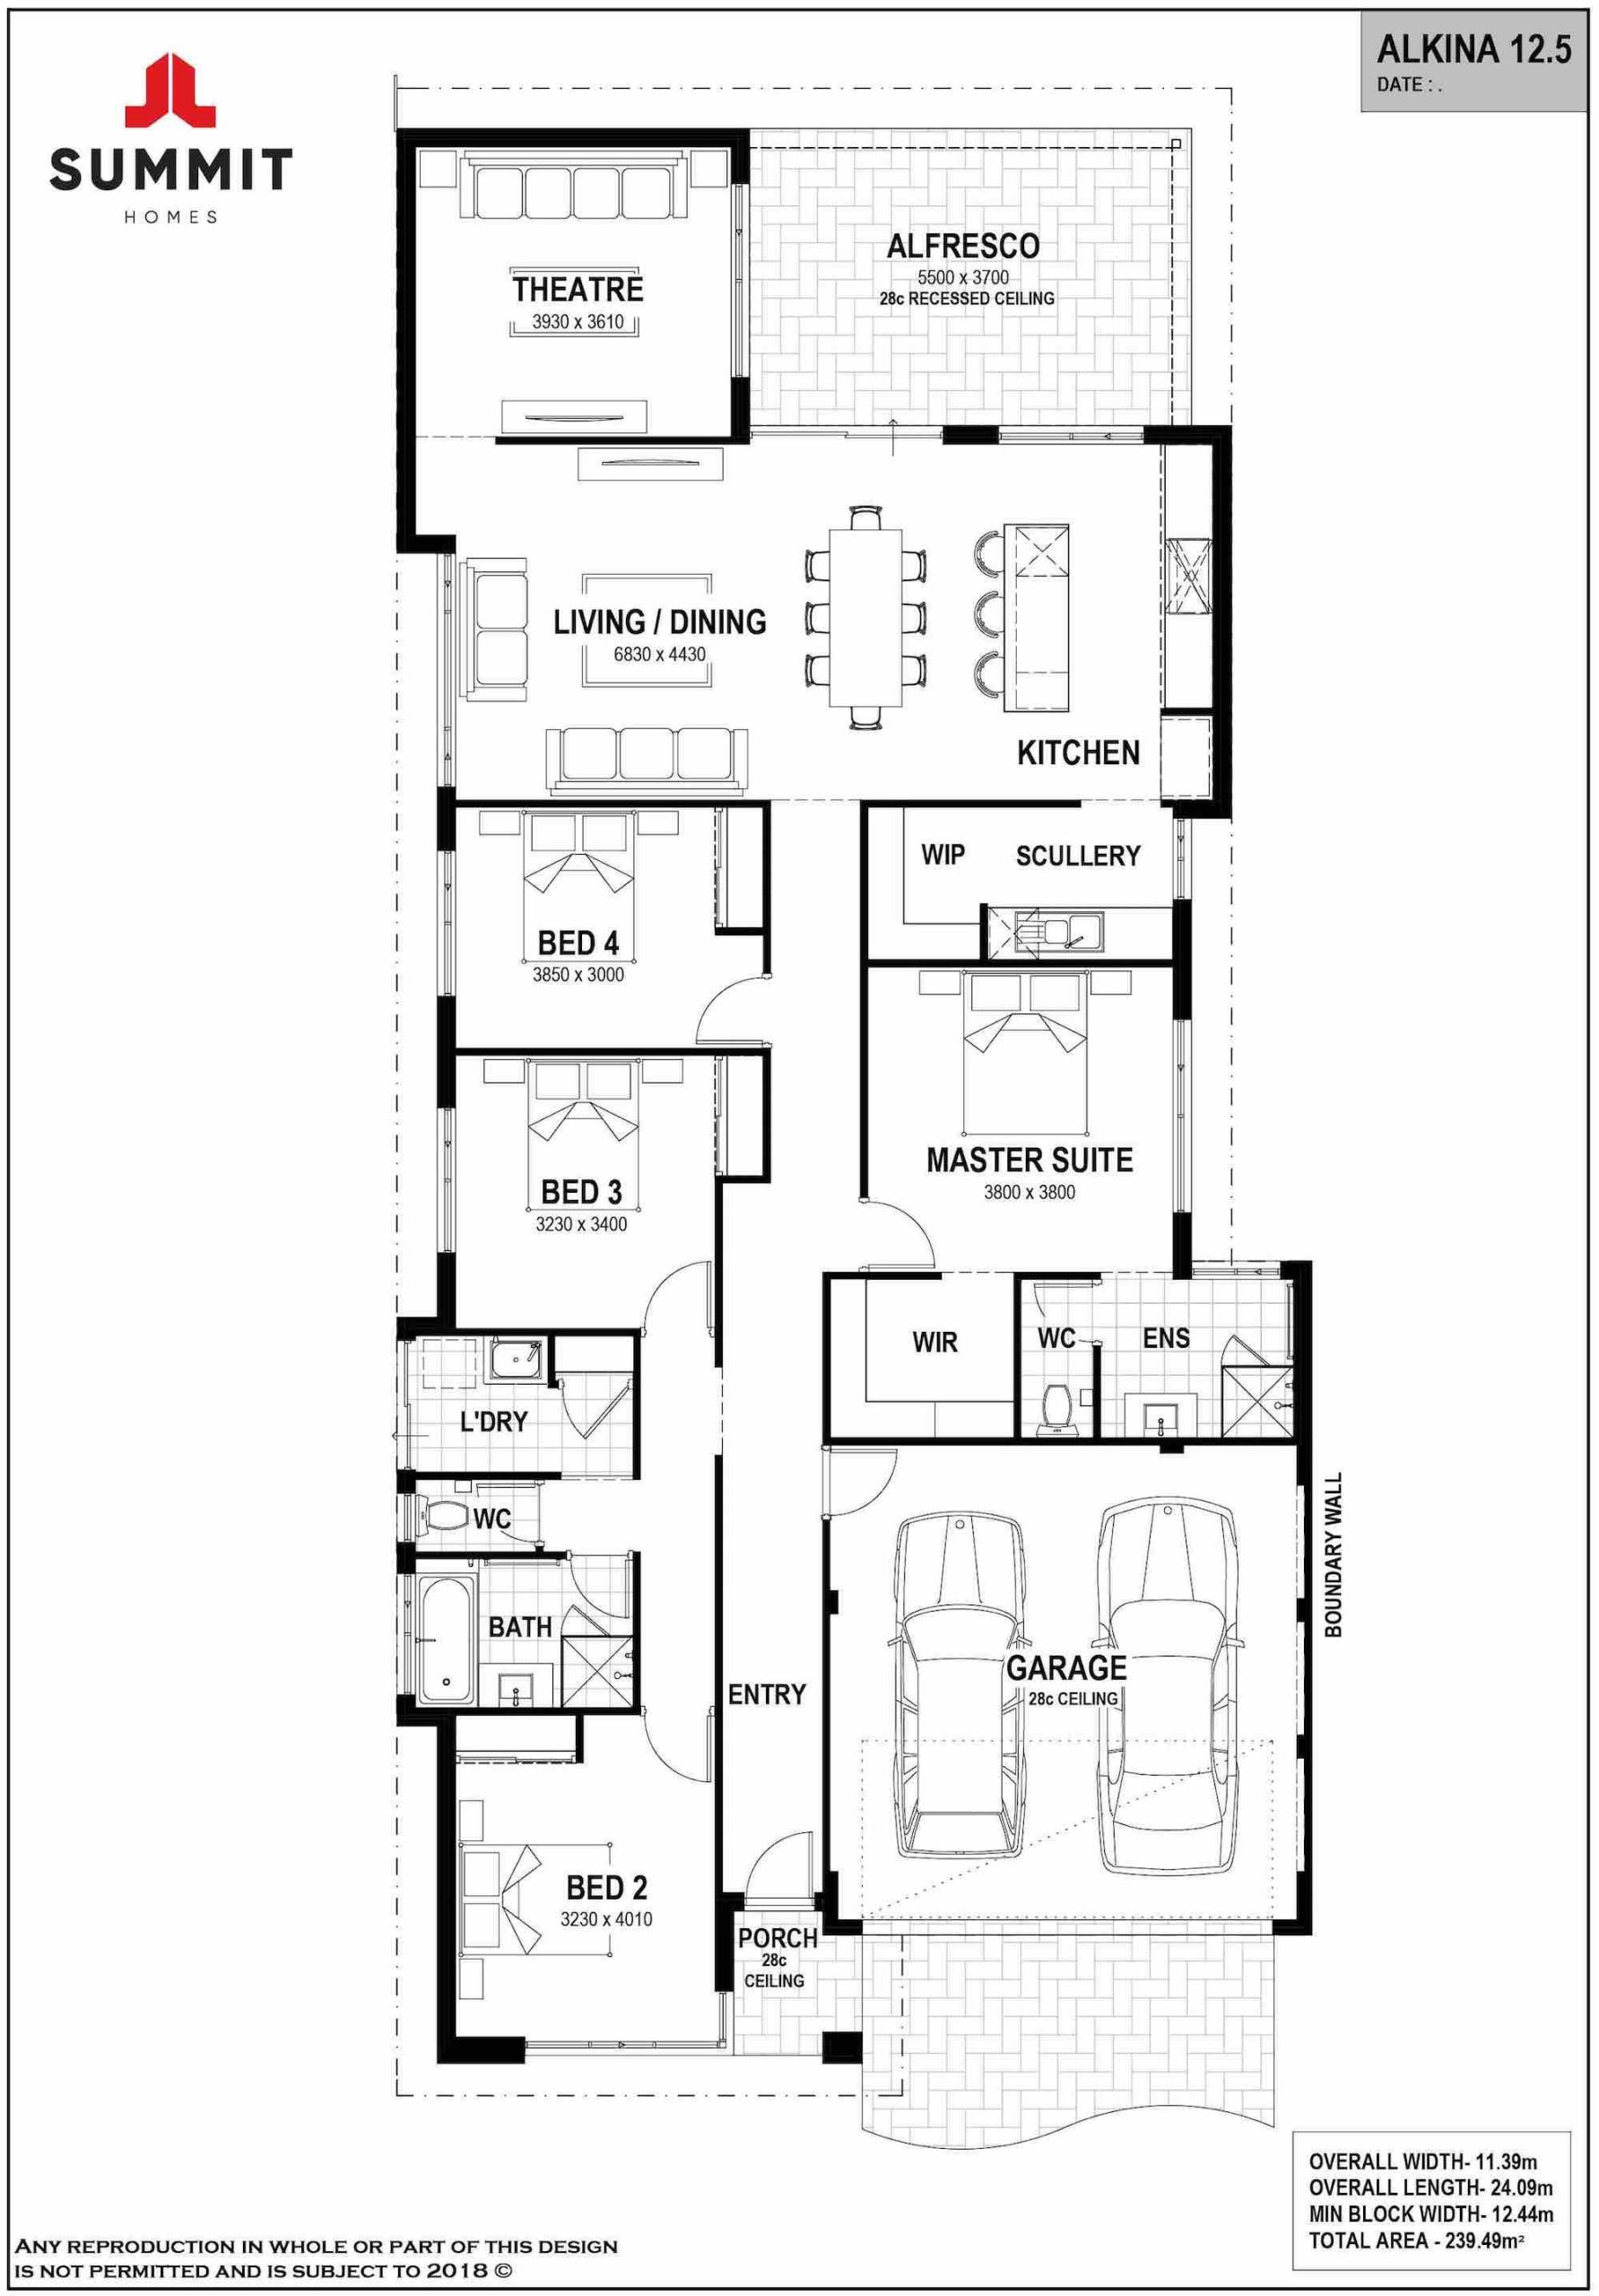 Lake-Treeby-Summit-Homes-House-and-Land-Package-ALKINA-12.5-floor-plan